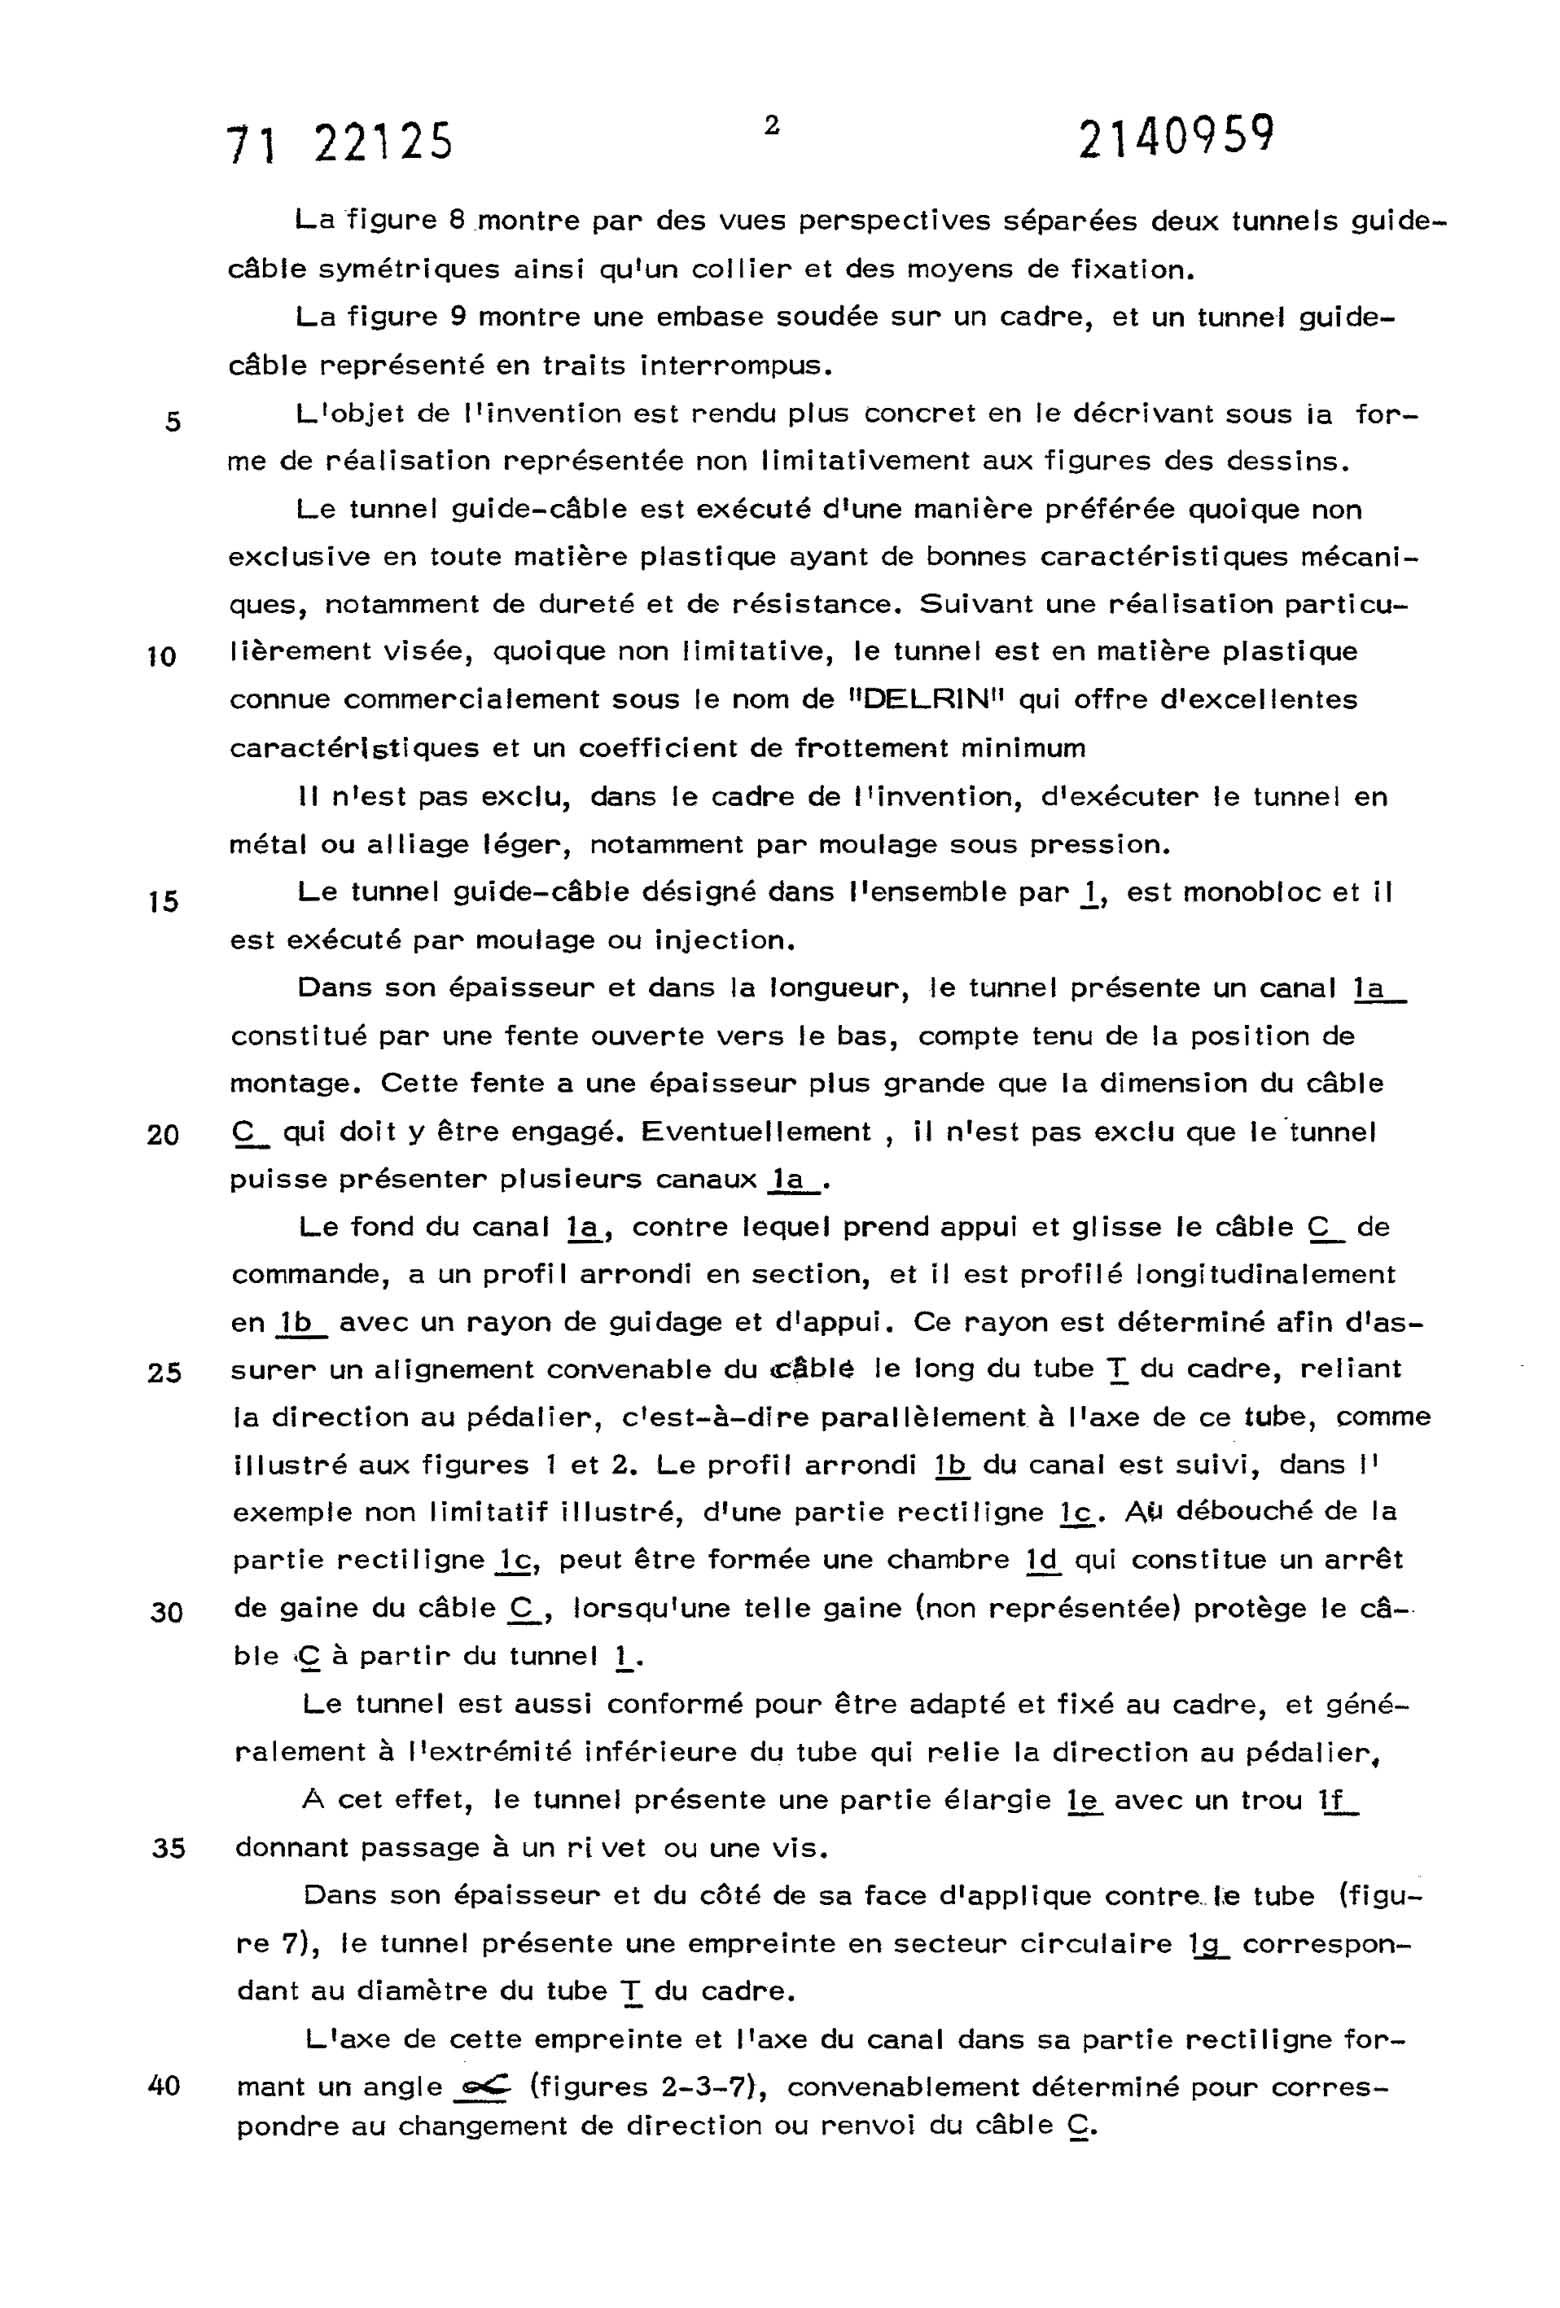 French Patent 2,140,959 - Simplex scan 003 main image